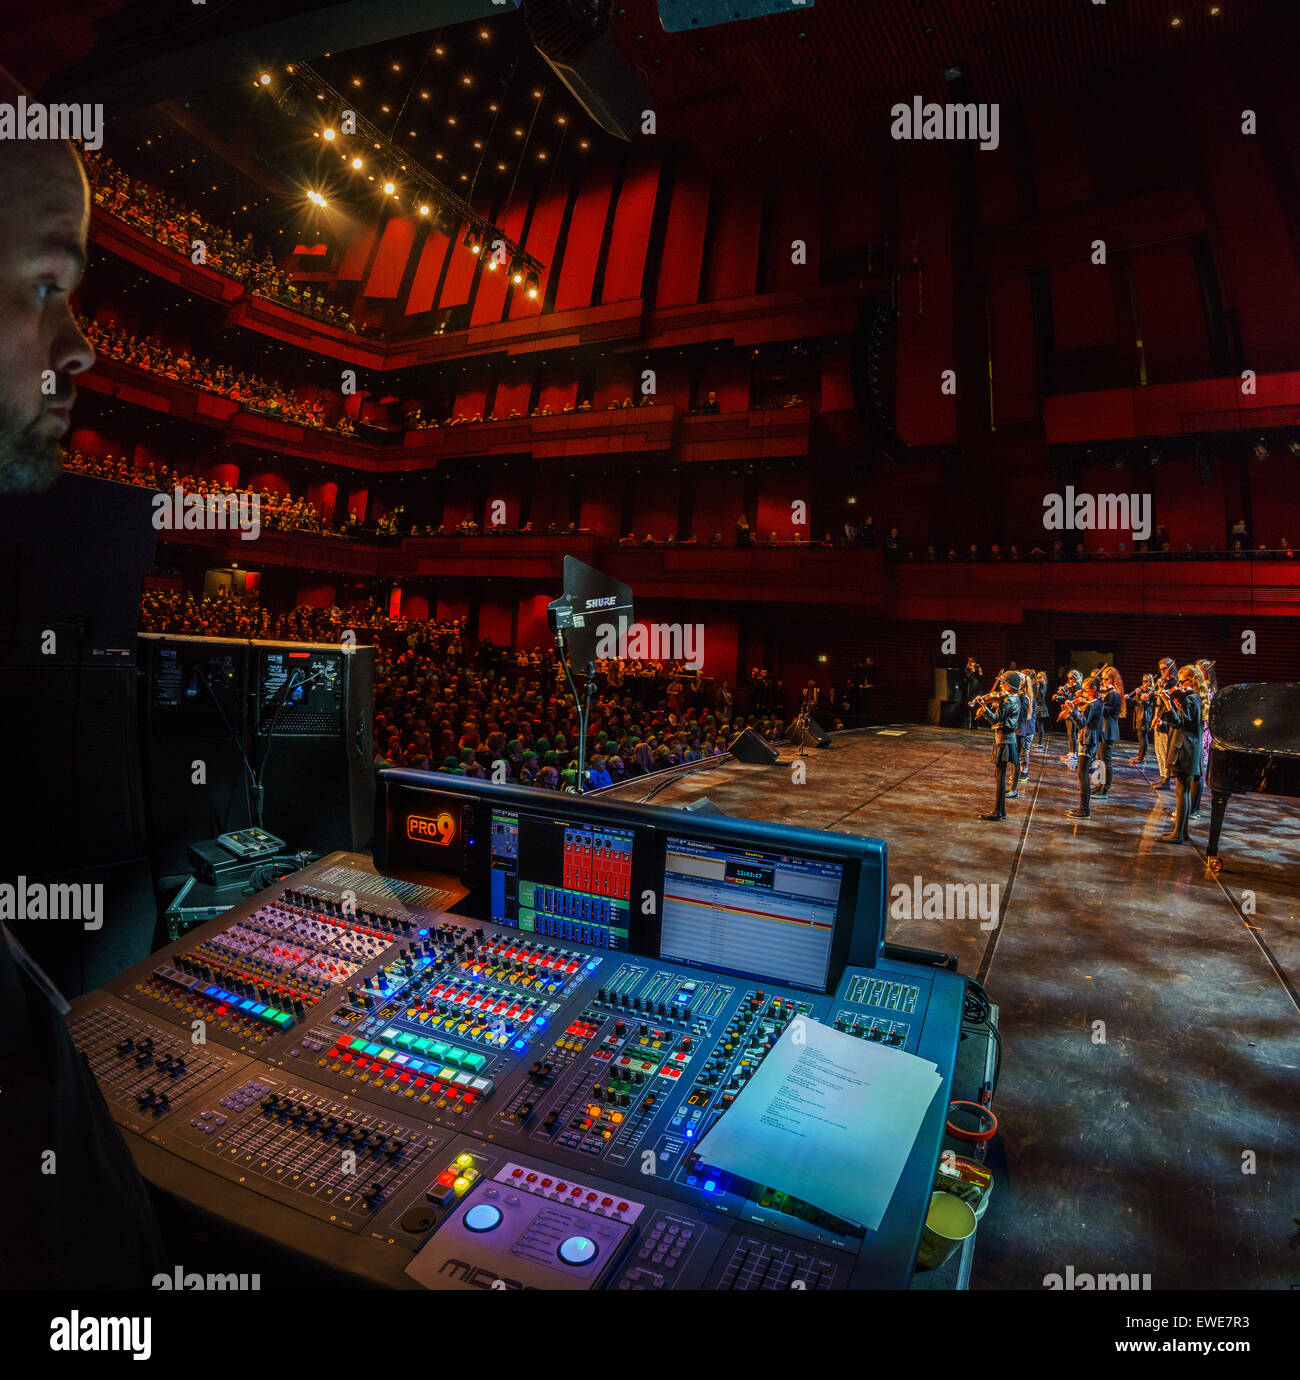 Sound mixing board used for musical performances. Young group performing, Harpa, Reykjavik, Iceland Stock Photo